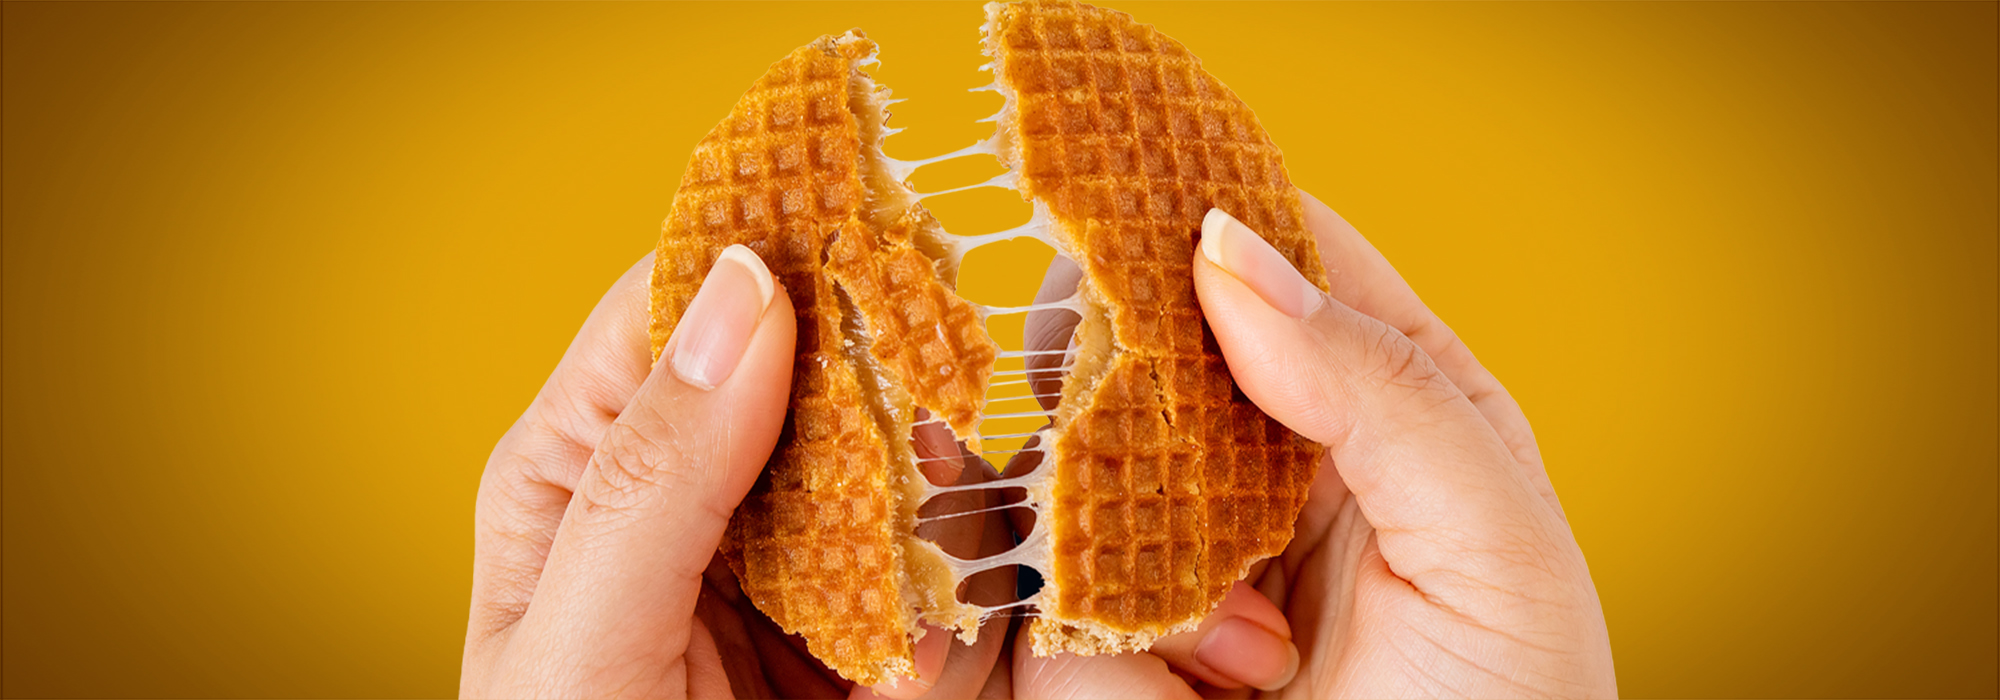 A person breaks a Stroopwafel in half and the warmed syrup filling stretches between the halves of the cookie.